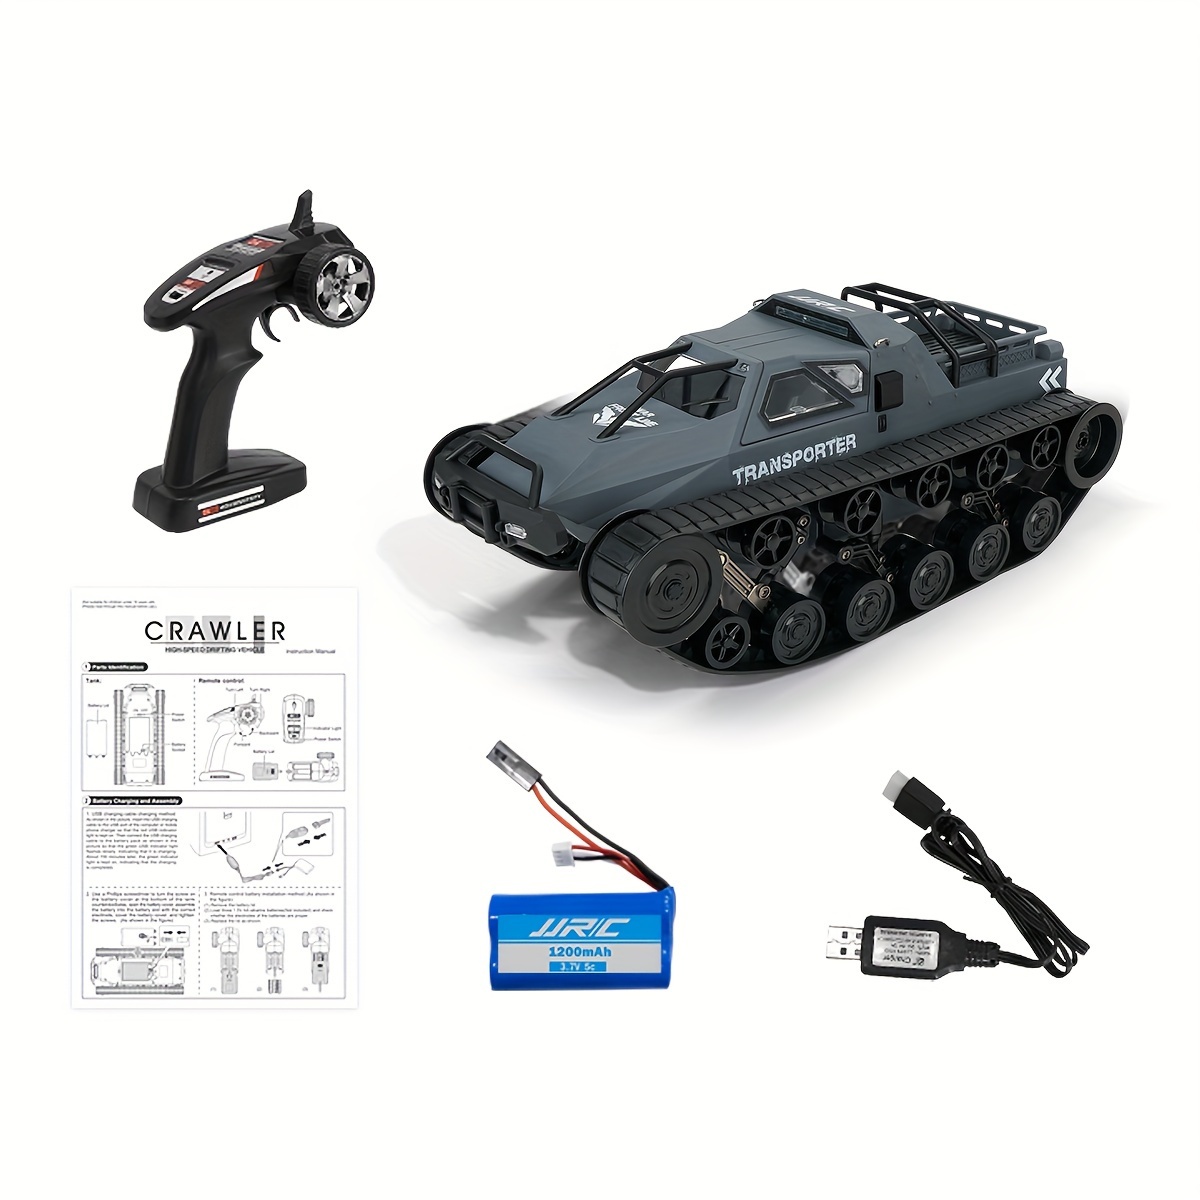 1/12 Scale 2.4ghz 12km/h High Speed Remote Control Tank 360